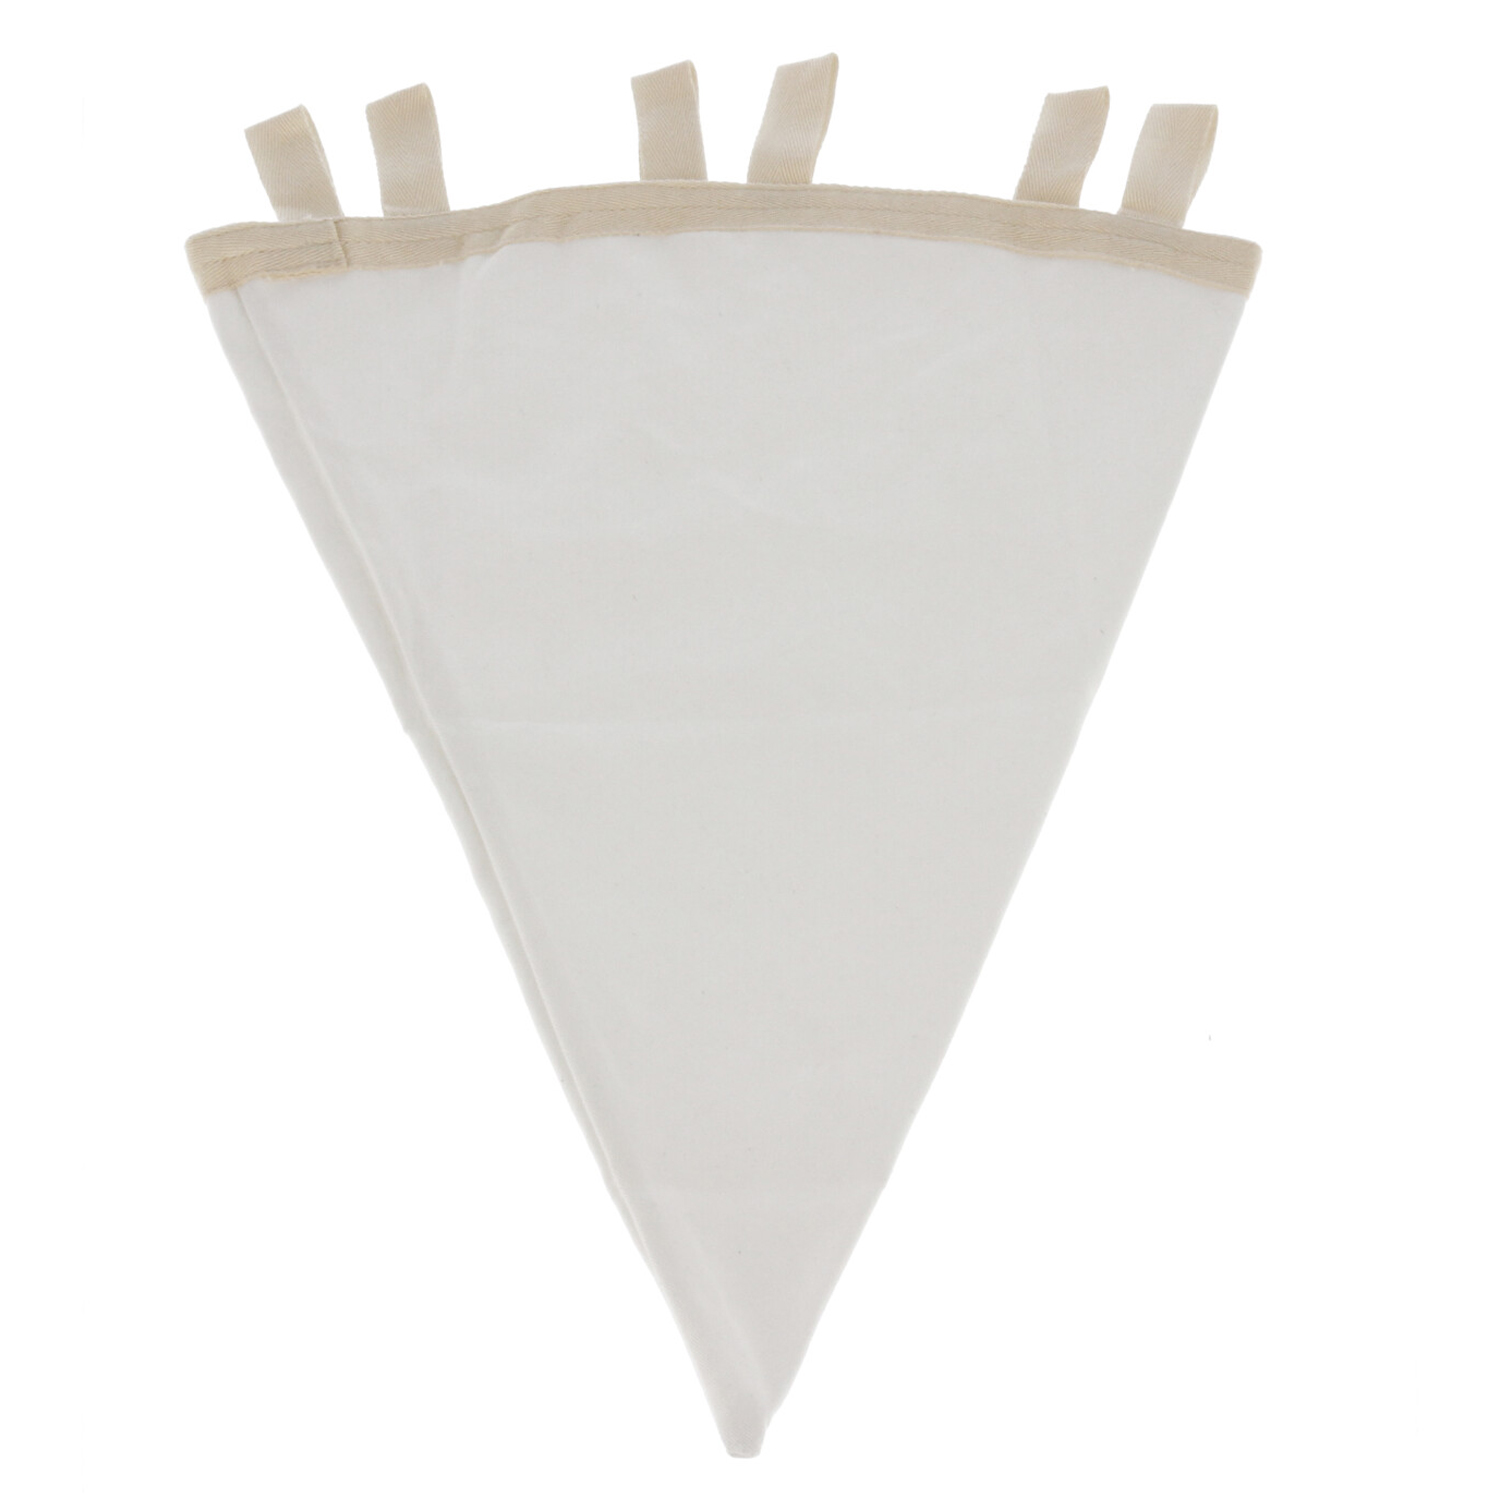 Cotton filter cone shaped 20l